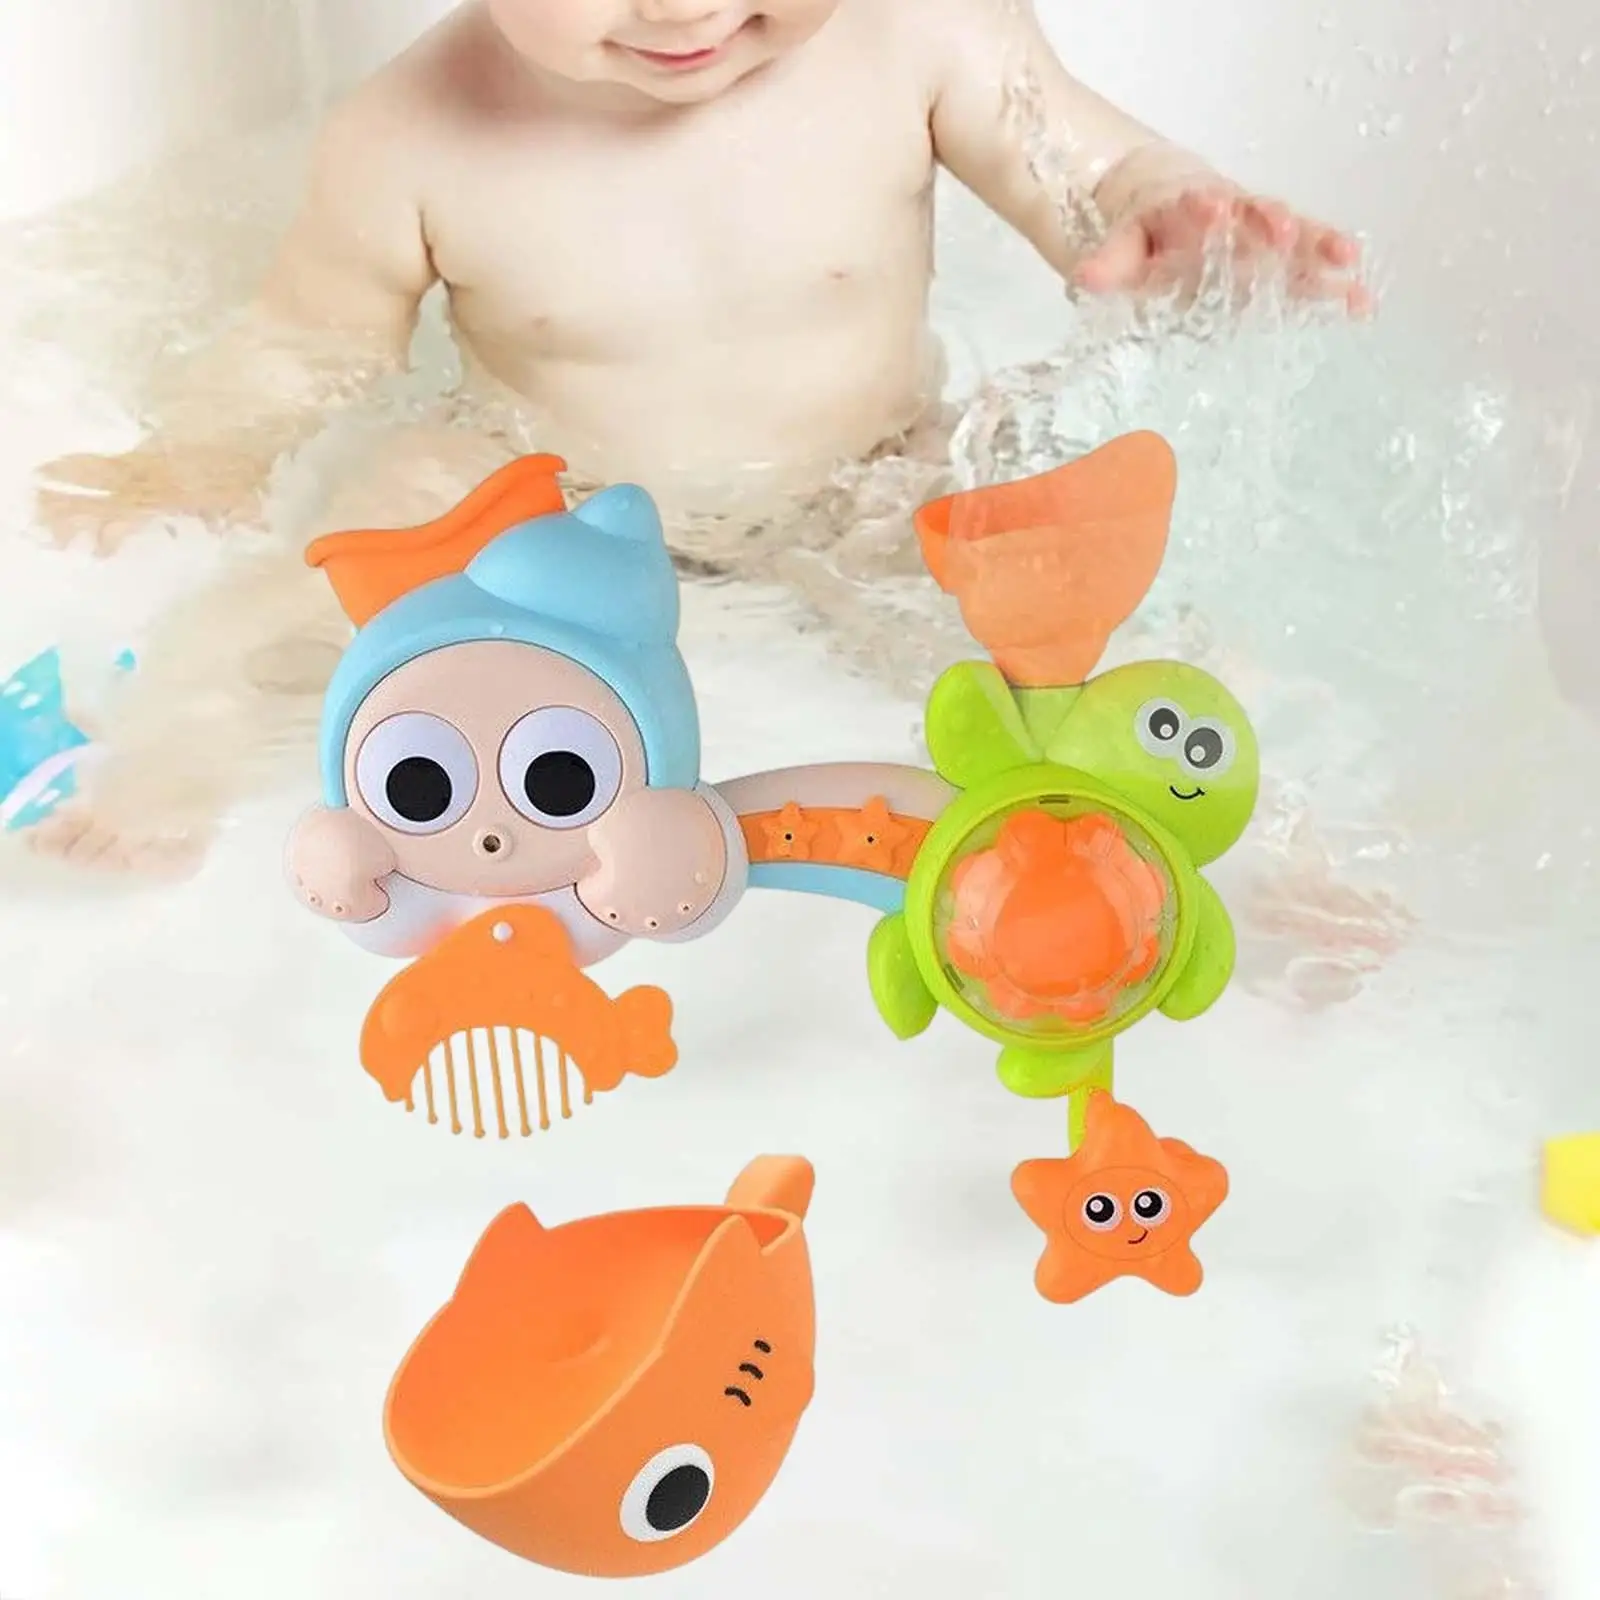 

Bathtub Toy with Comb Sensory Development Interactive Toys Bath Time Water Toys for Preschool Children Kids Birthday Gifts